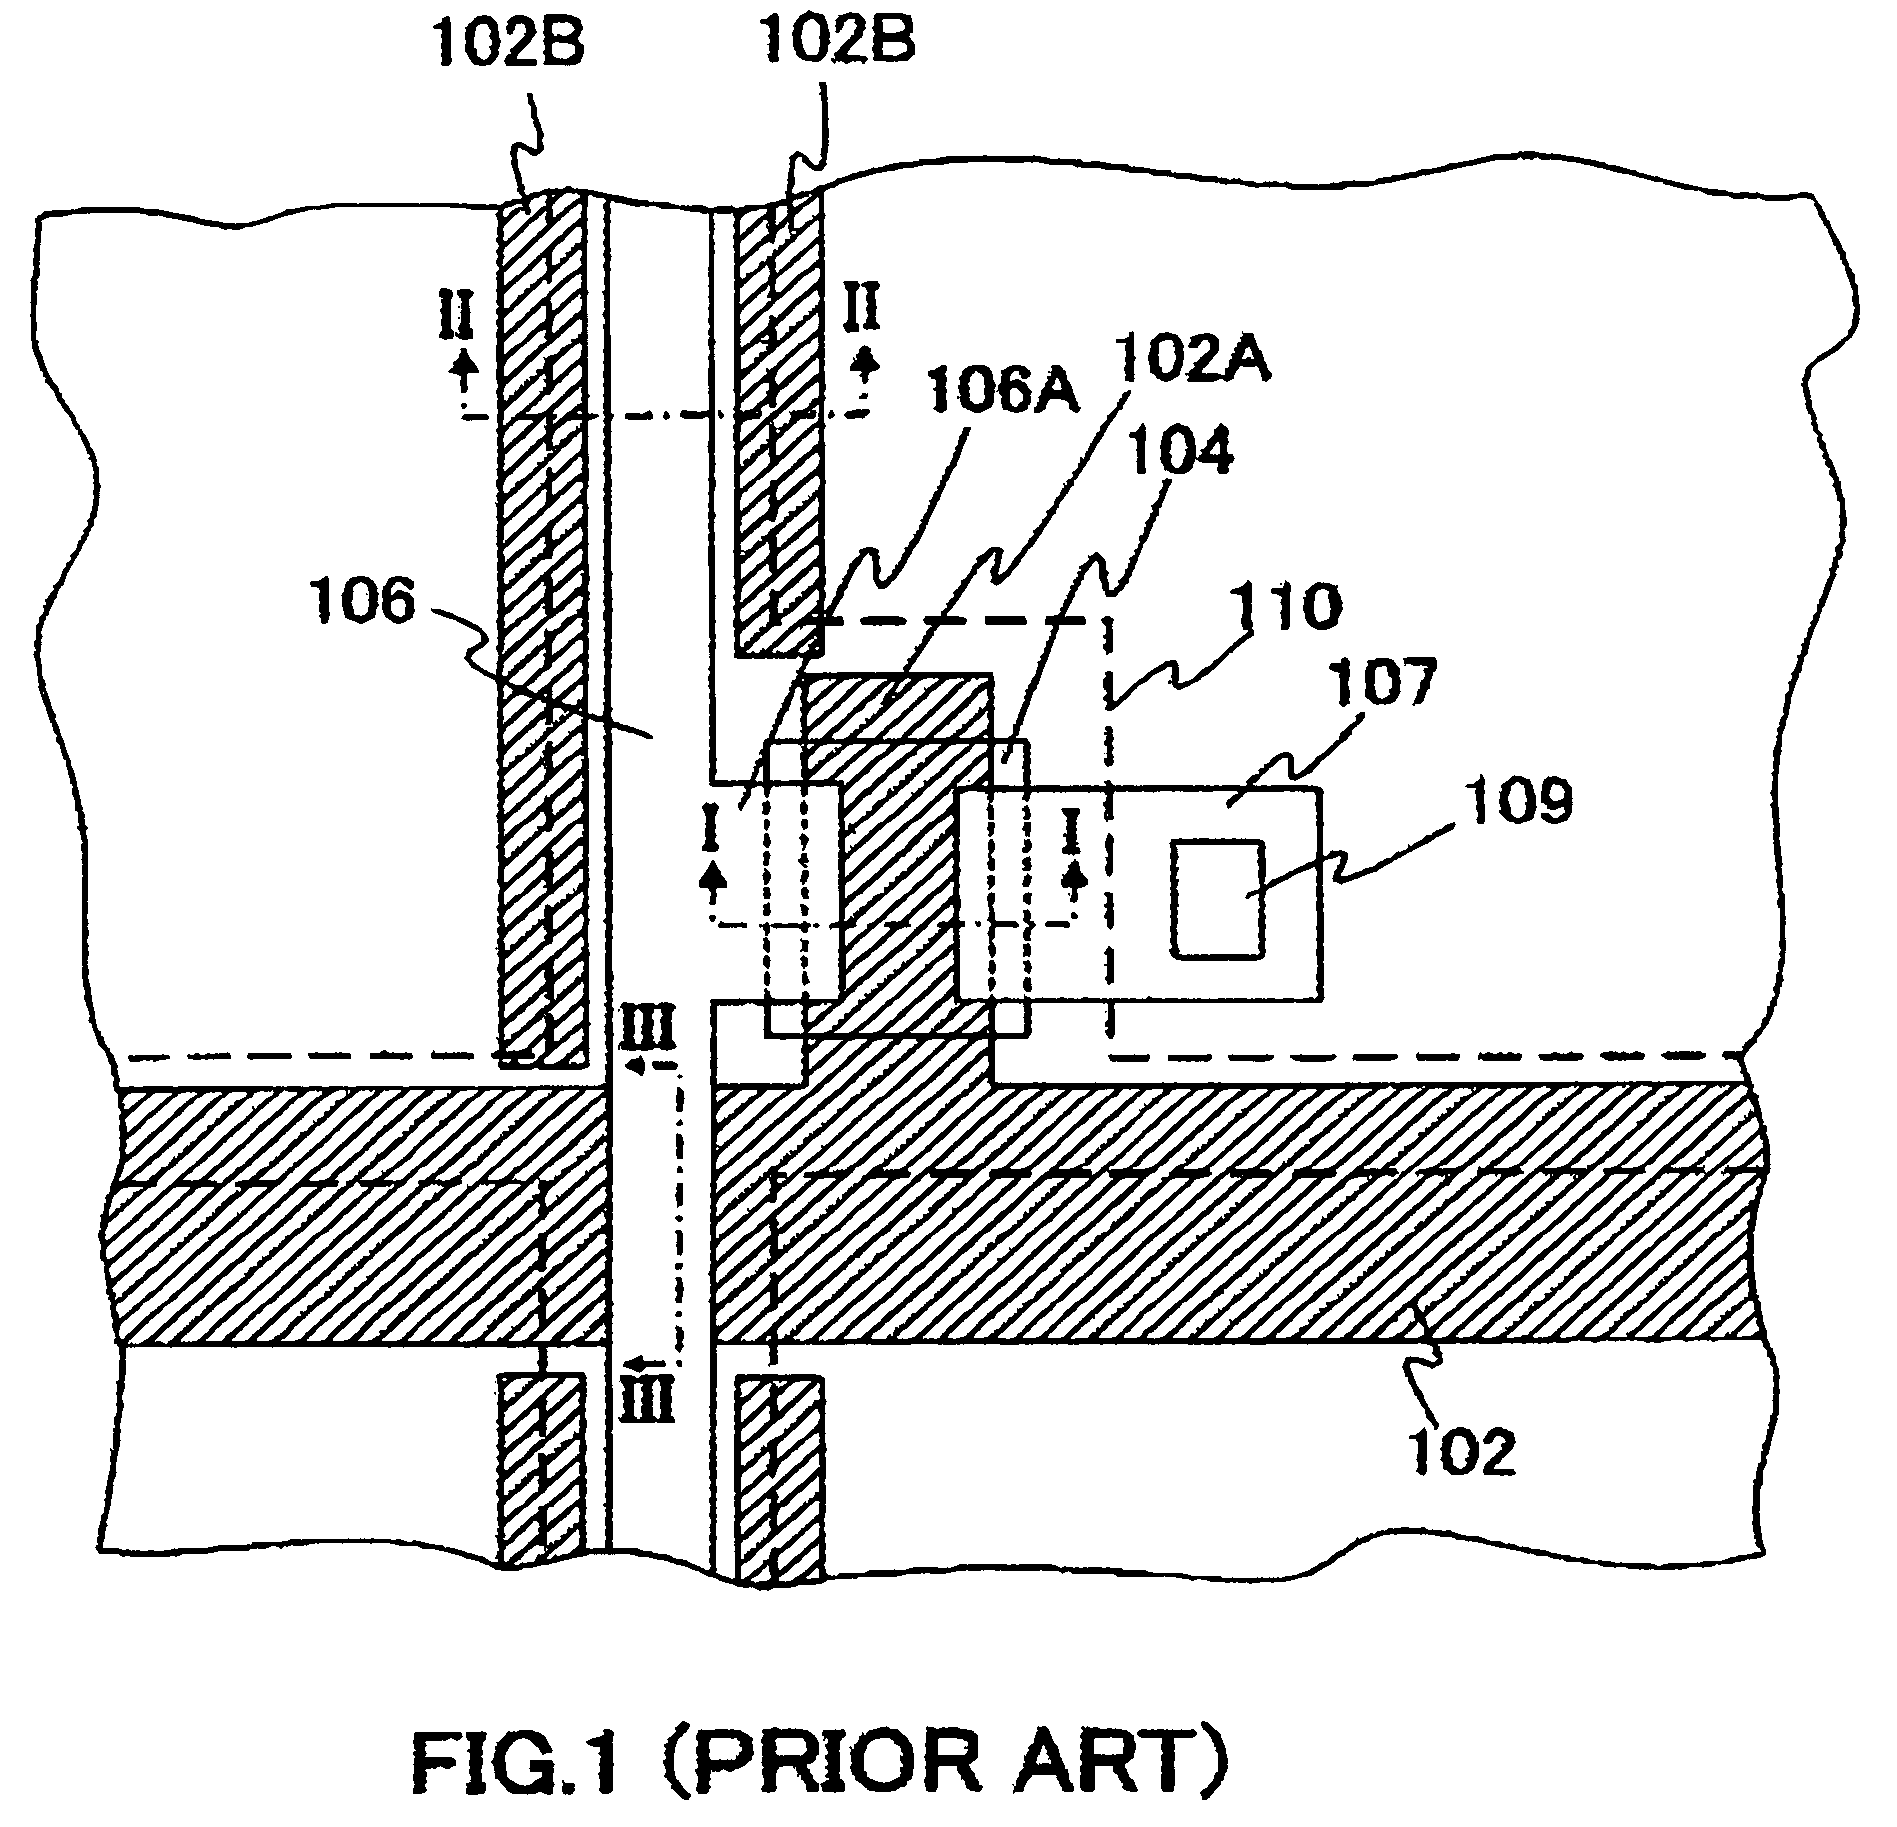 LCD device and method including a plastic substrate with metal layer containing copper surrounded by barrier metal film embedded in a groove within the plastic substrate